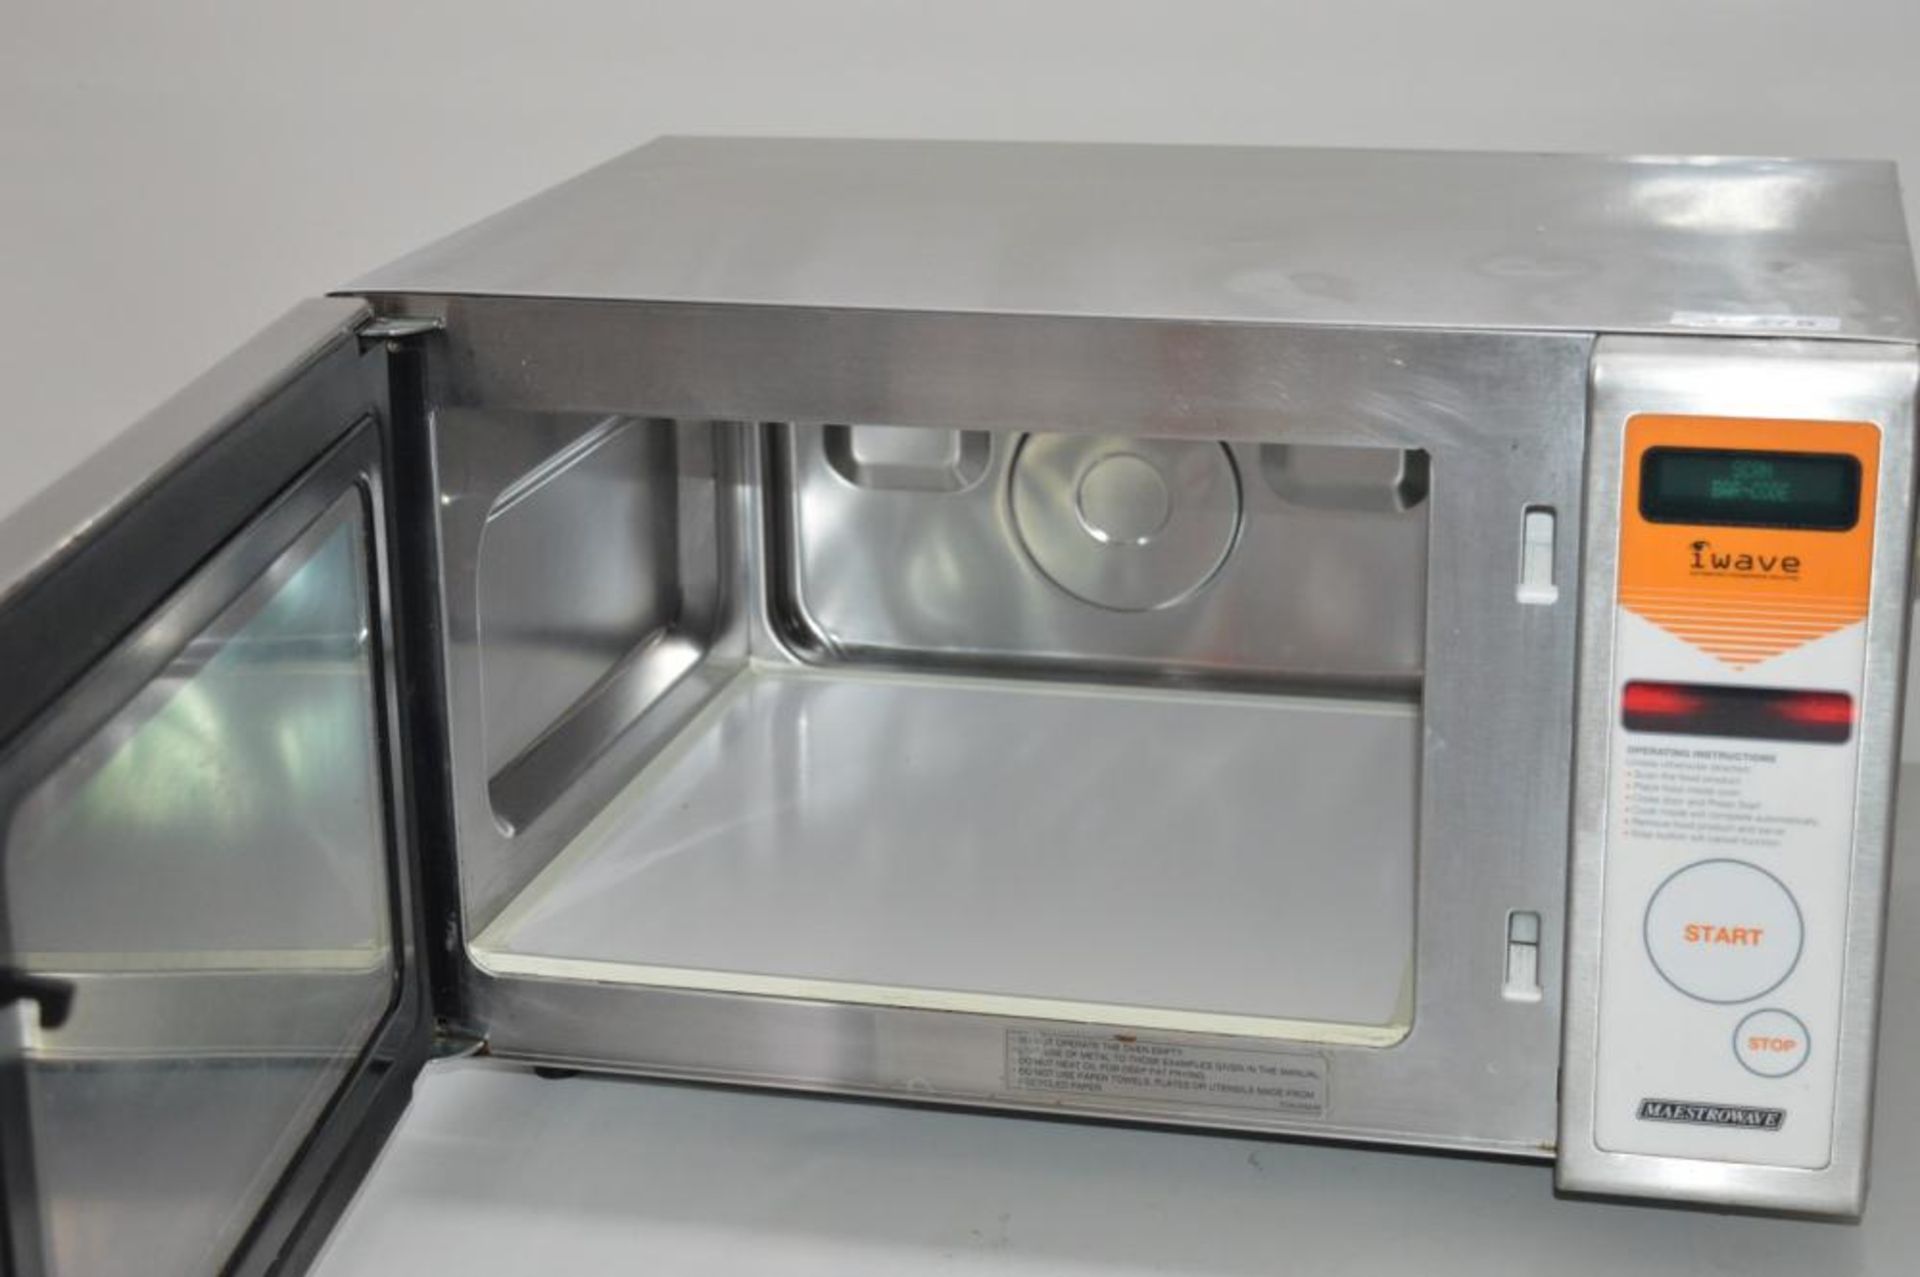 1 x iWave MiWAVE1000 Automated Foodservice Solution - Stainless Steel 1000w Catering Microwave - Image 14 of 14